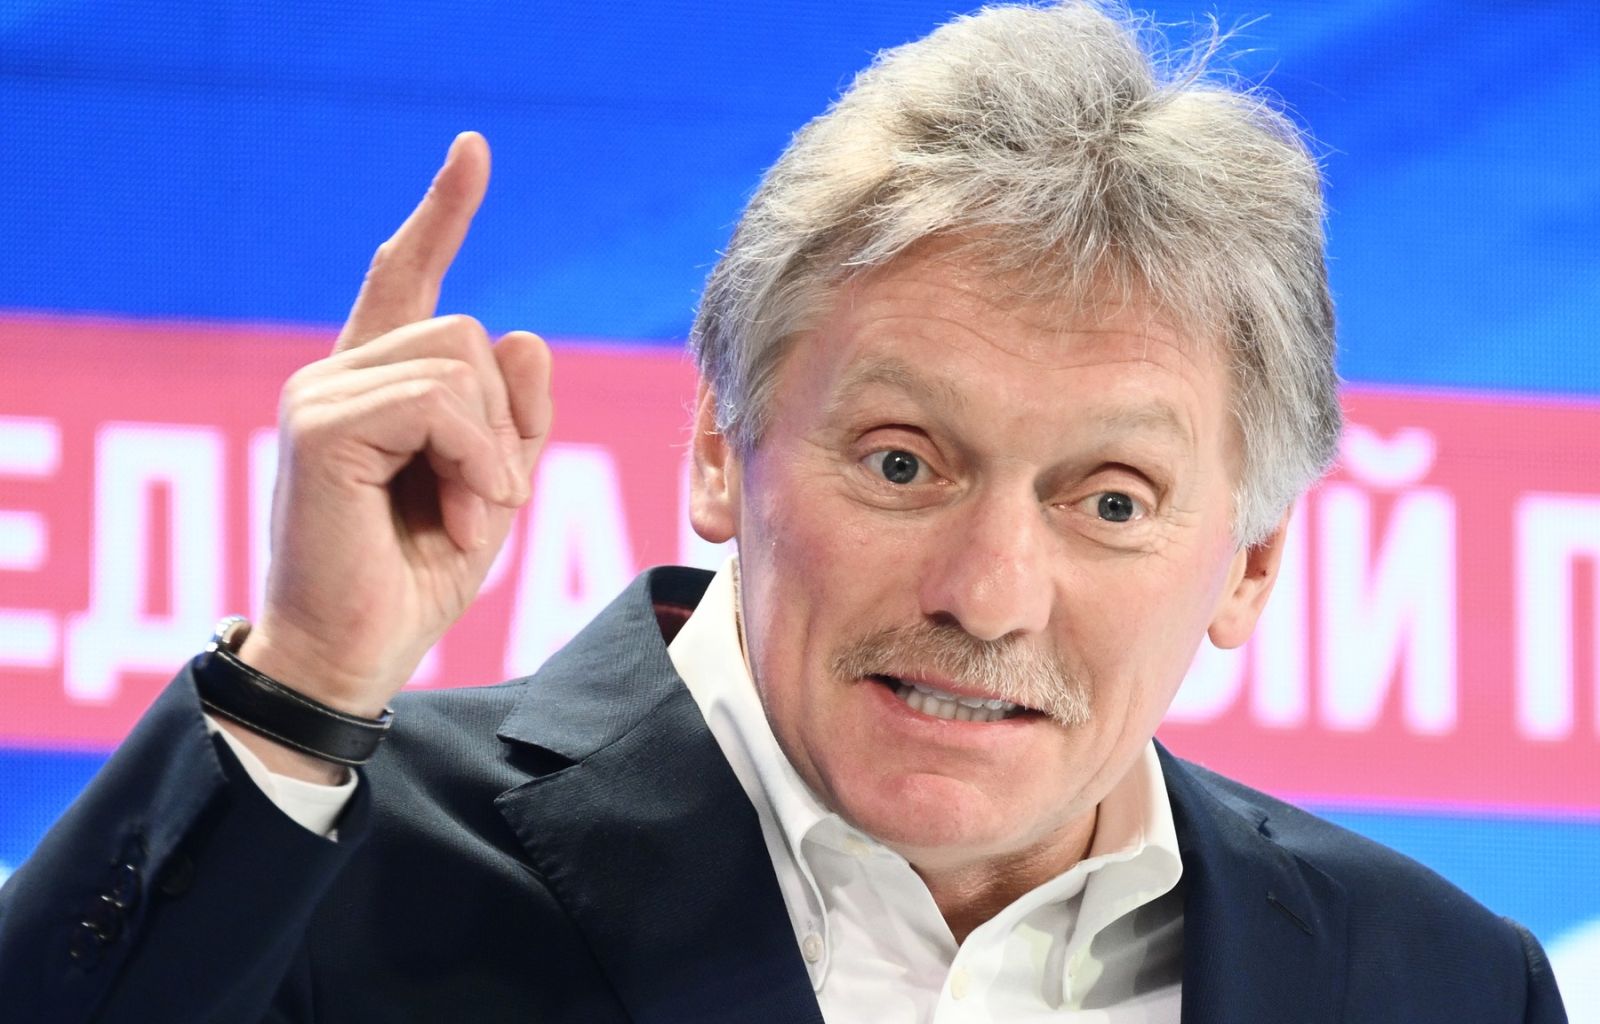 8636042 06.03.2024 Kremlin spokesman Dmitry Peskov gives a lecture on the topic: "The Image of Russia: Reality and Imposed Stereotypes" during the 2024 World Youth Festival at the Sirius Federal Territory, Krasnodar Region, Russia.,Image: 854215173, License: Rights-managed, Restrictions: Editors' note: THIS IMAGE IS PROVIDED BY RUSSIAN STATE-OWNED AGENCY SPUTNIK., Model Release: no, Credit line: Vladimir Astapkovich / Sputnik / Profimedia